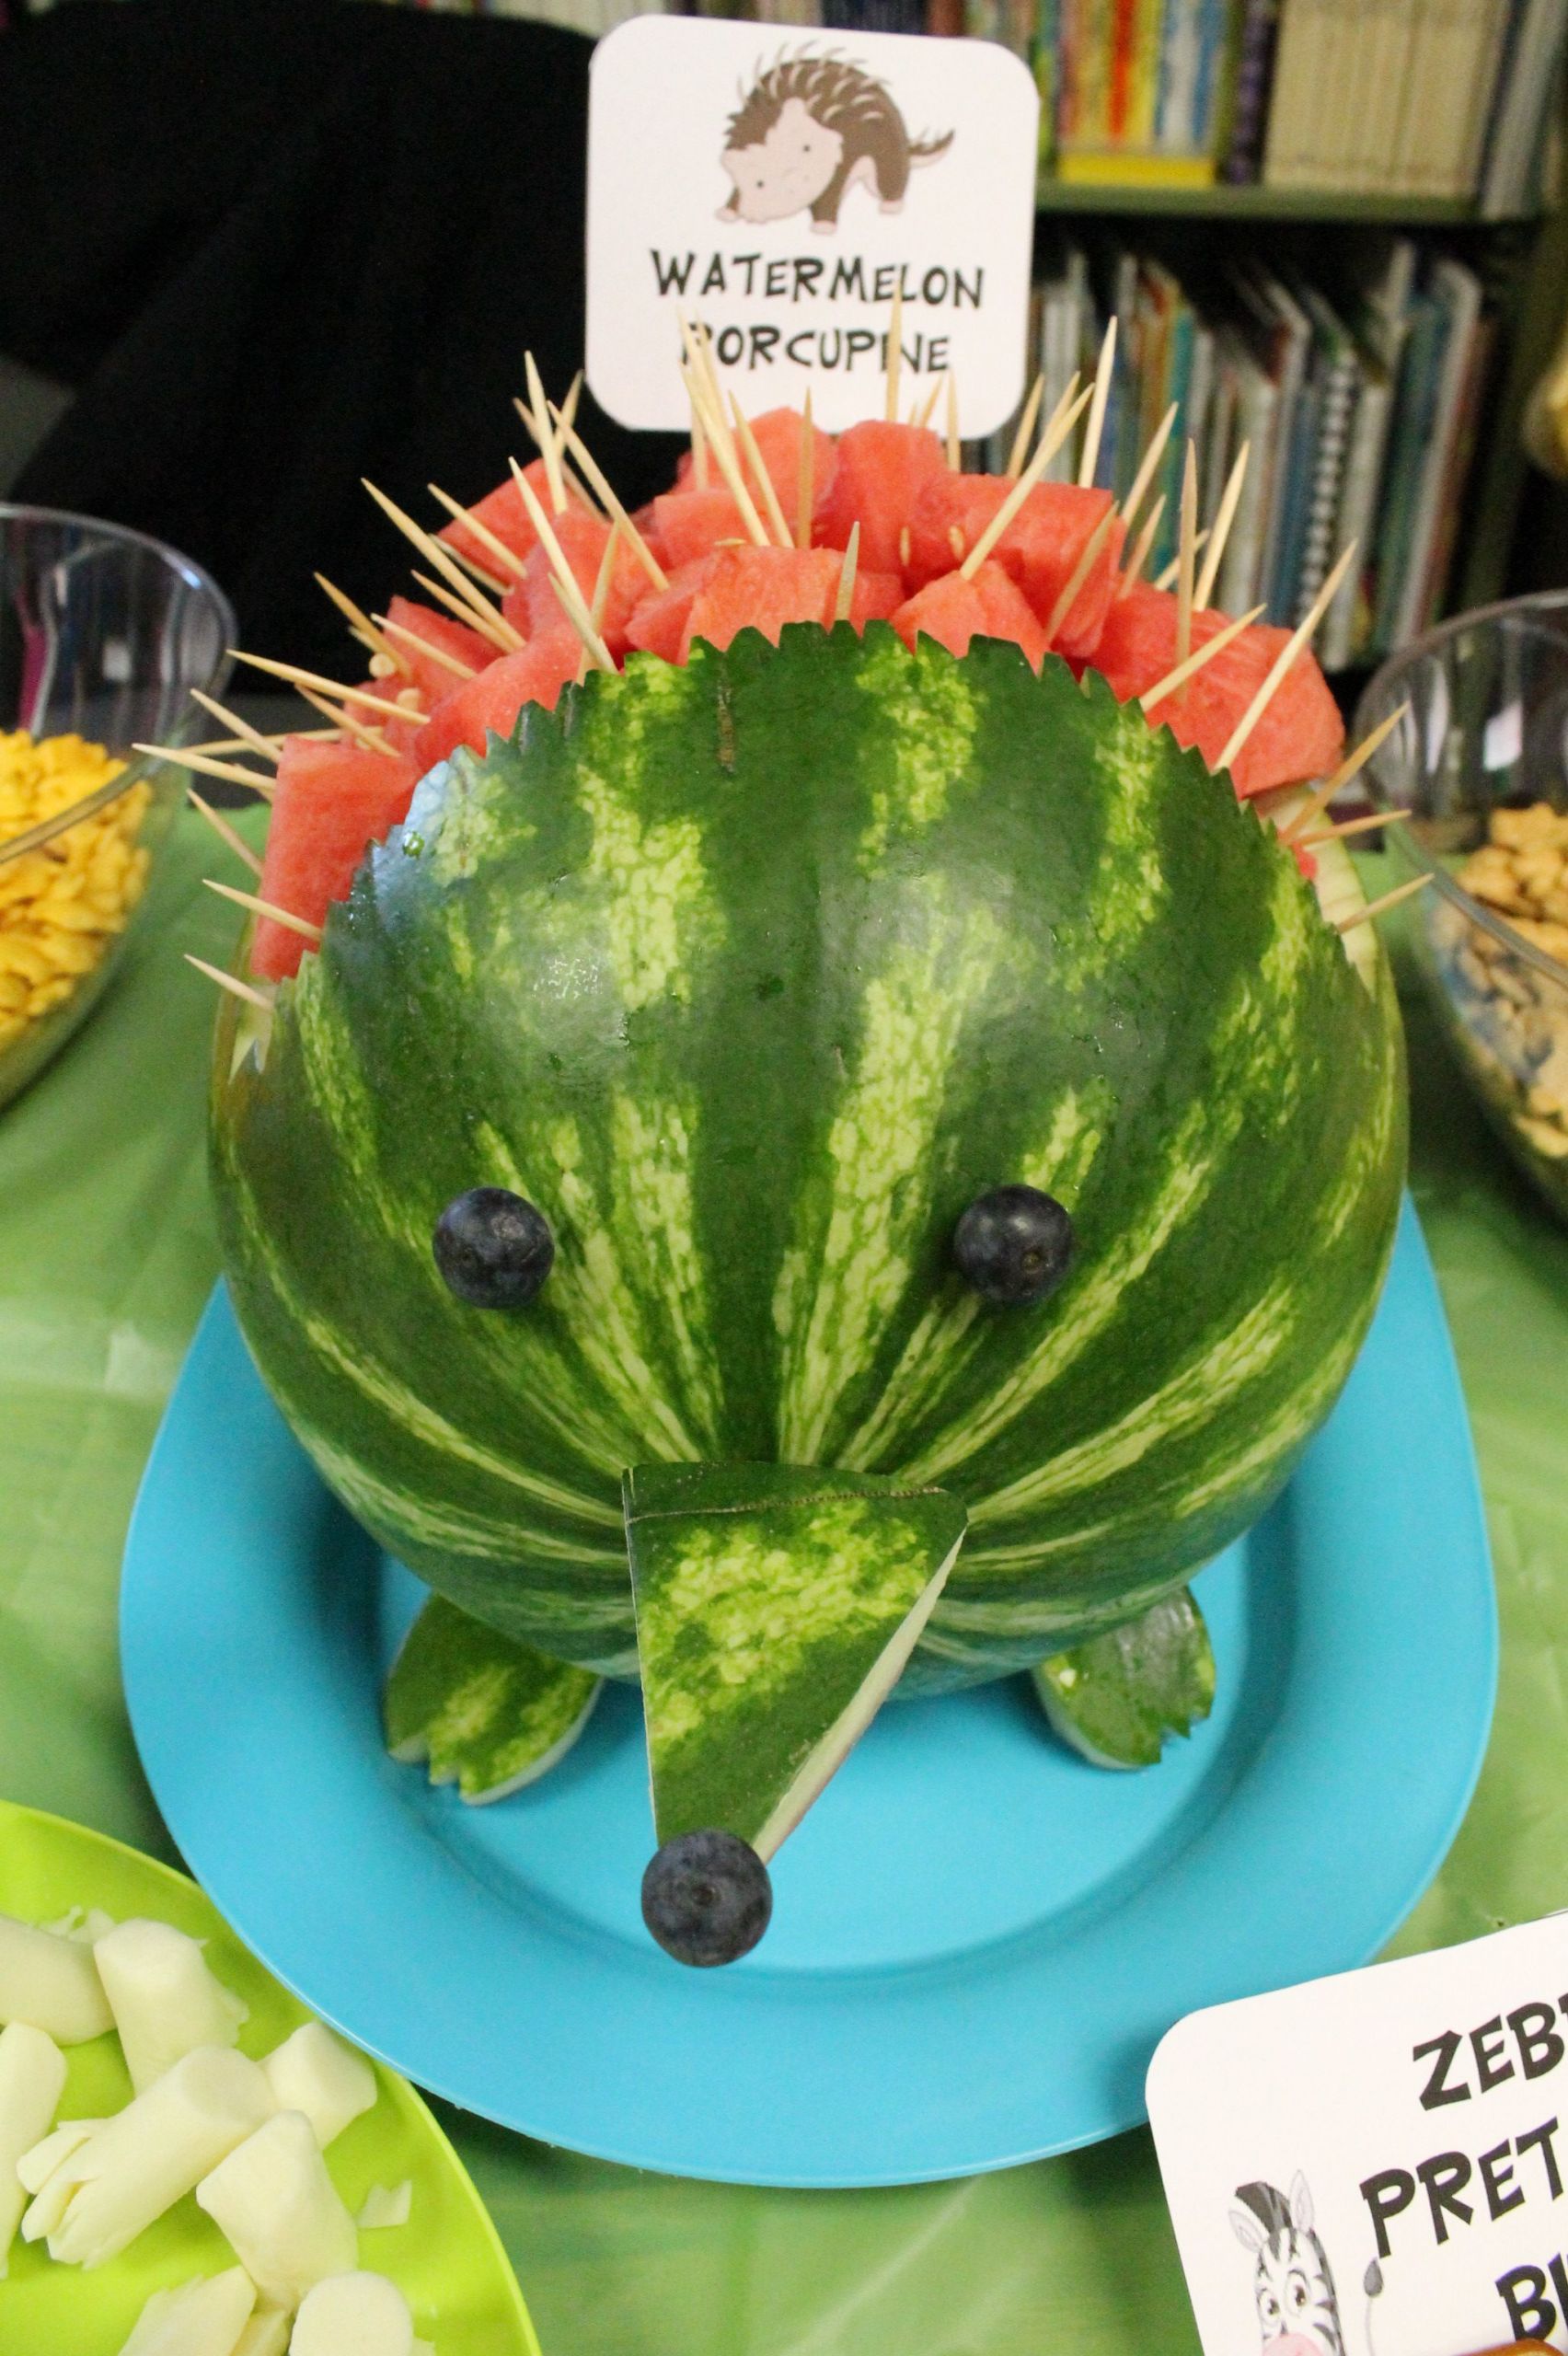 Zoo Birthday Party Food Ideas
 Zoo Party Food Watermelon Porcupine